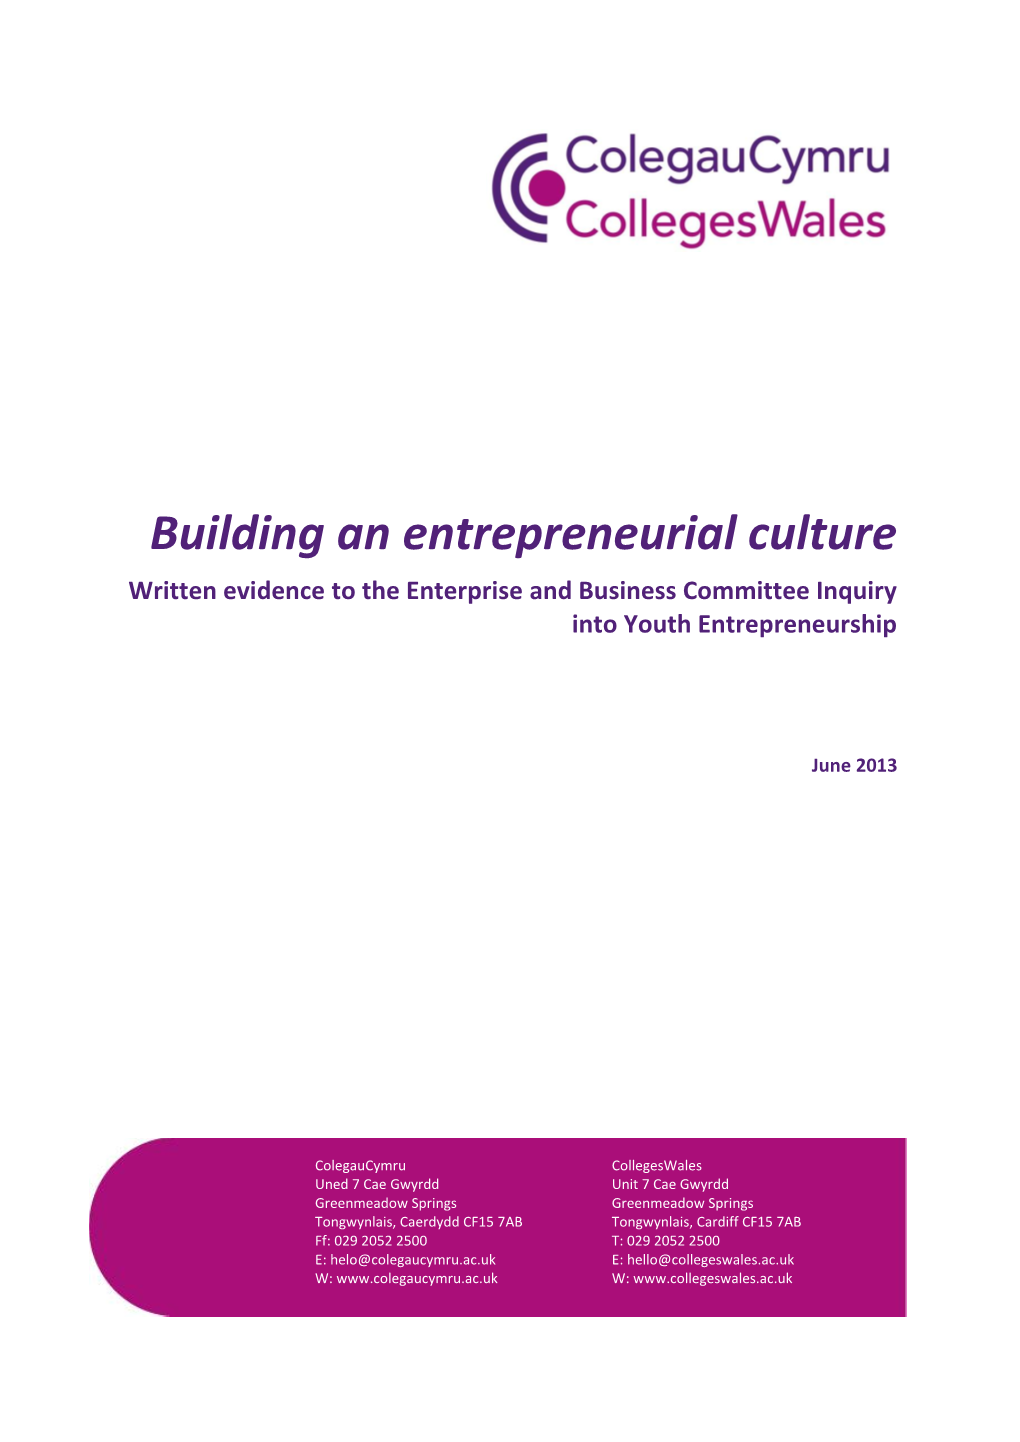 Building an Entrepreneurial Culture Written Evidence to the Enterprise and Business Committee Inquiry Into Youth Entrepreneurship